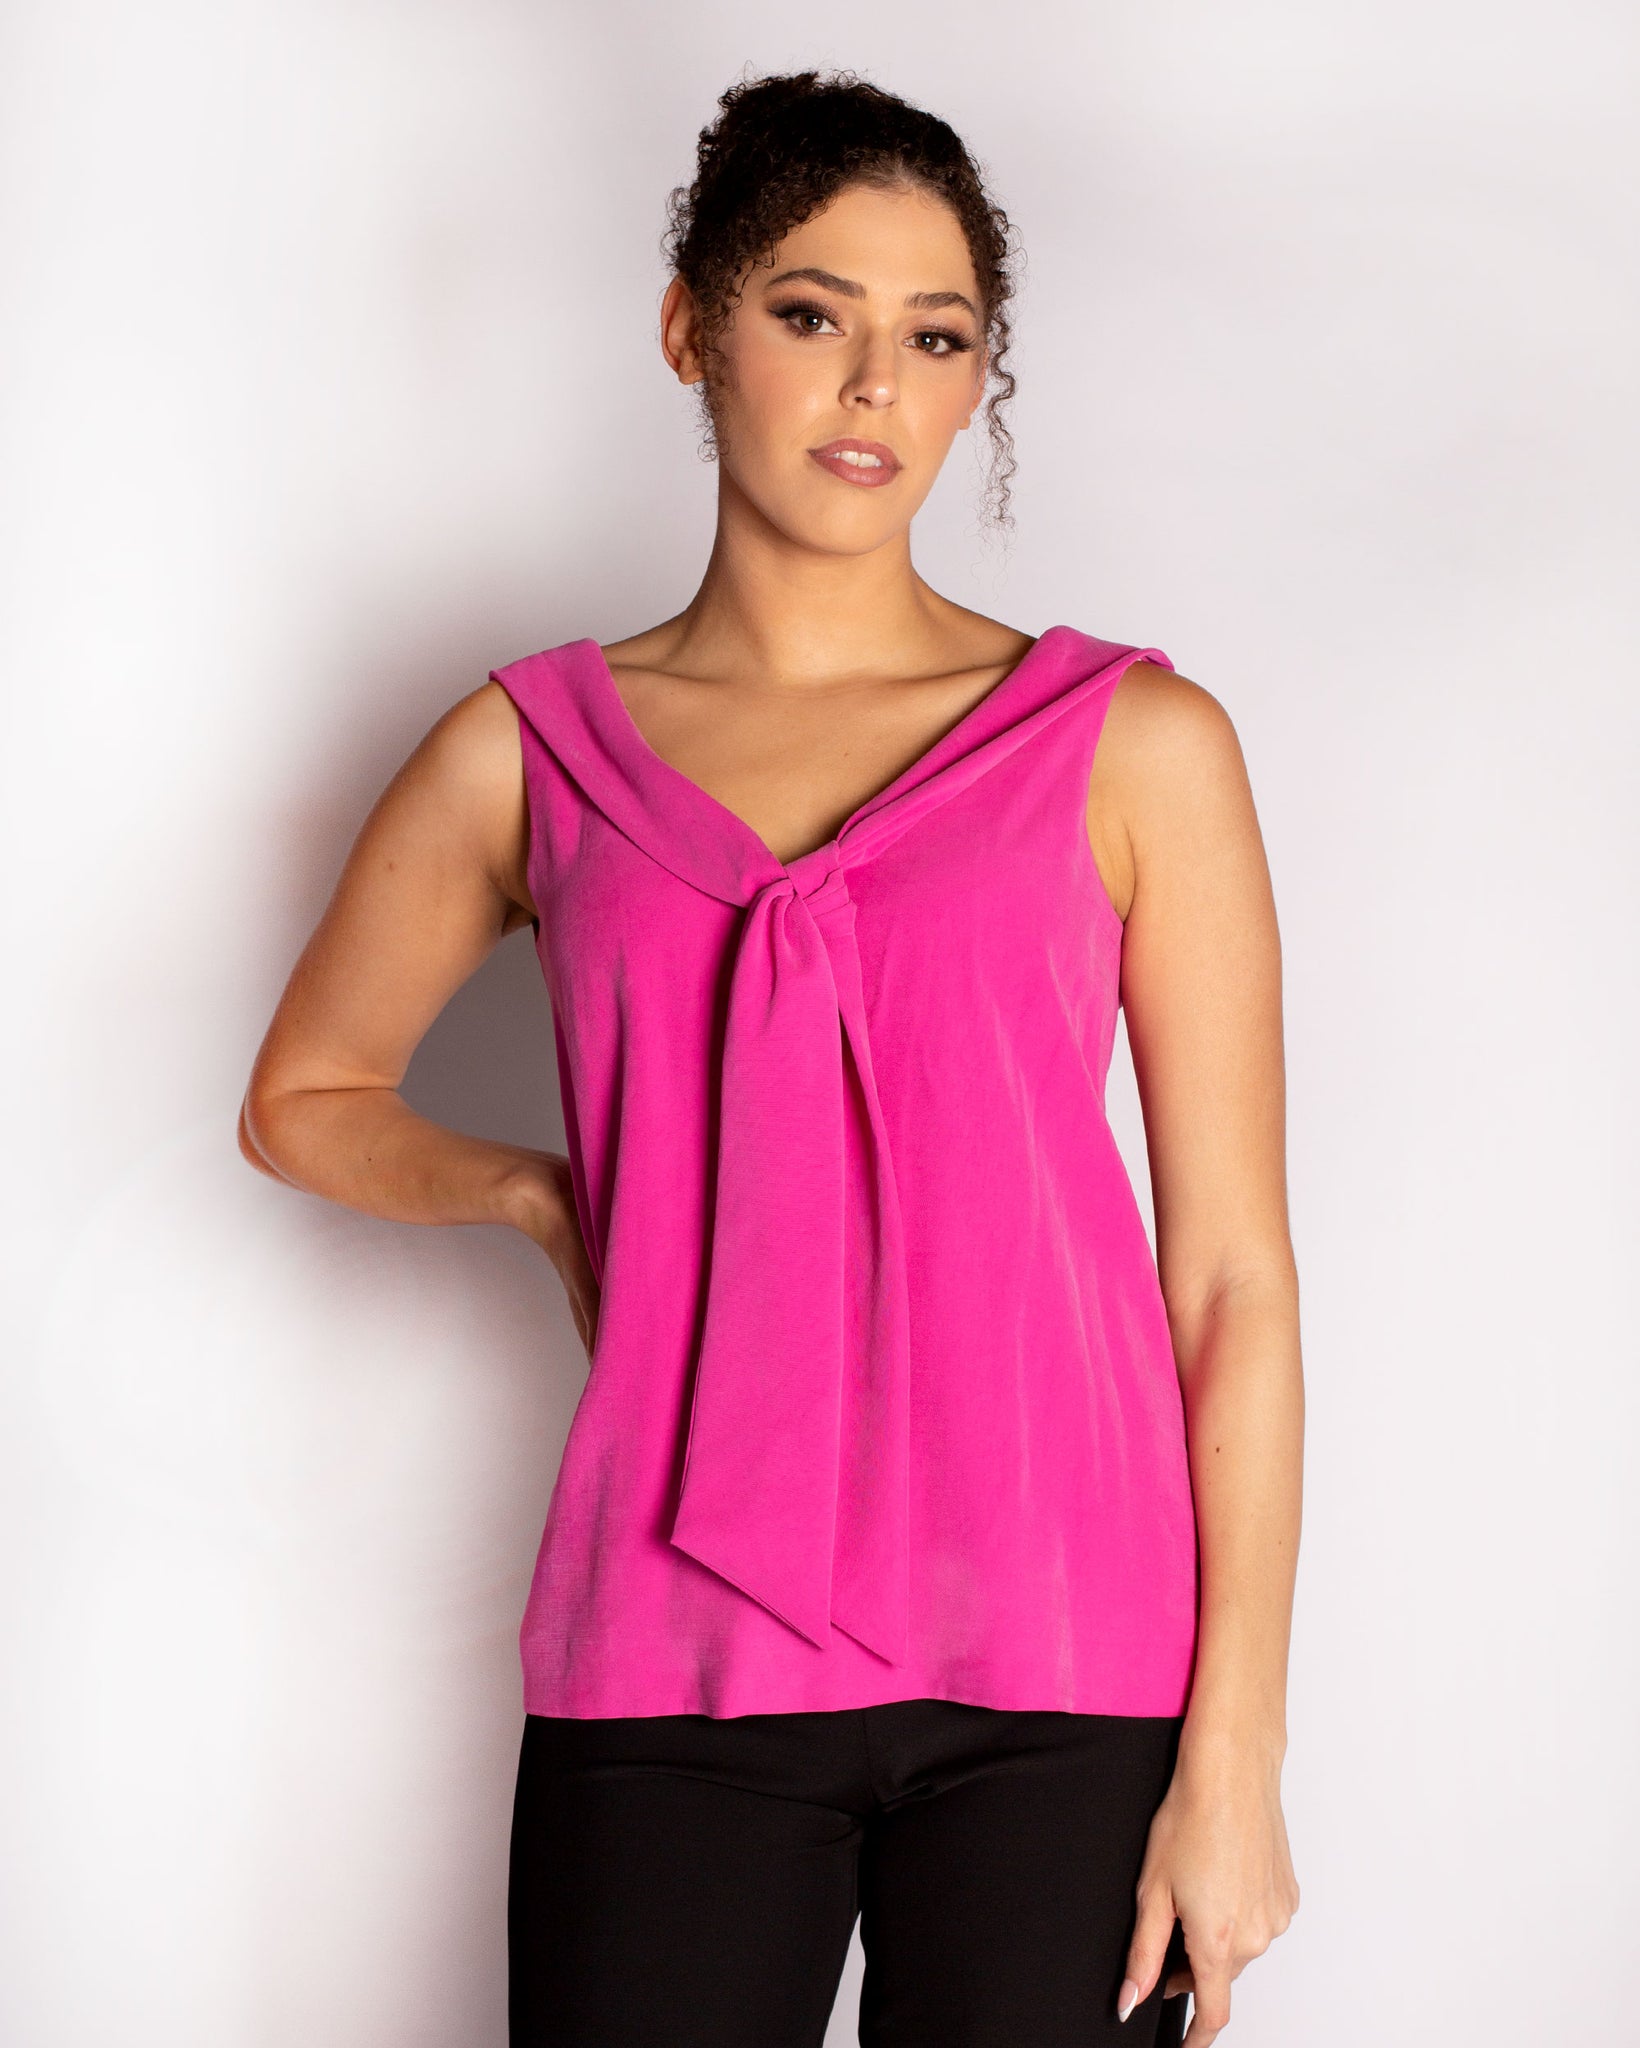 The Penelope Top